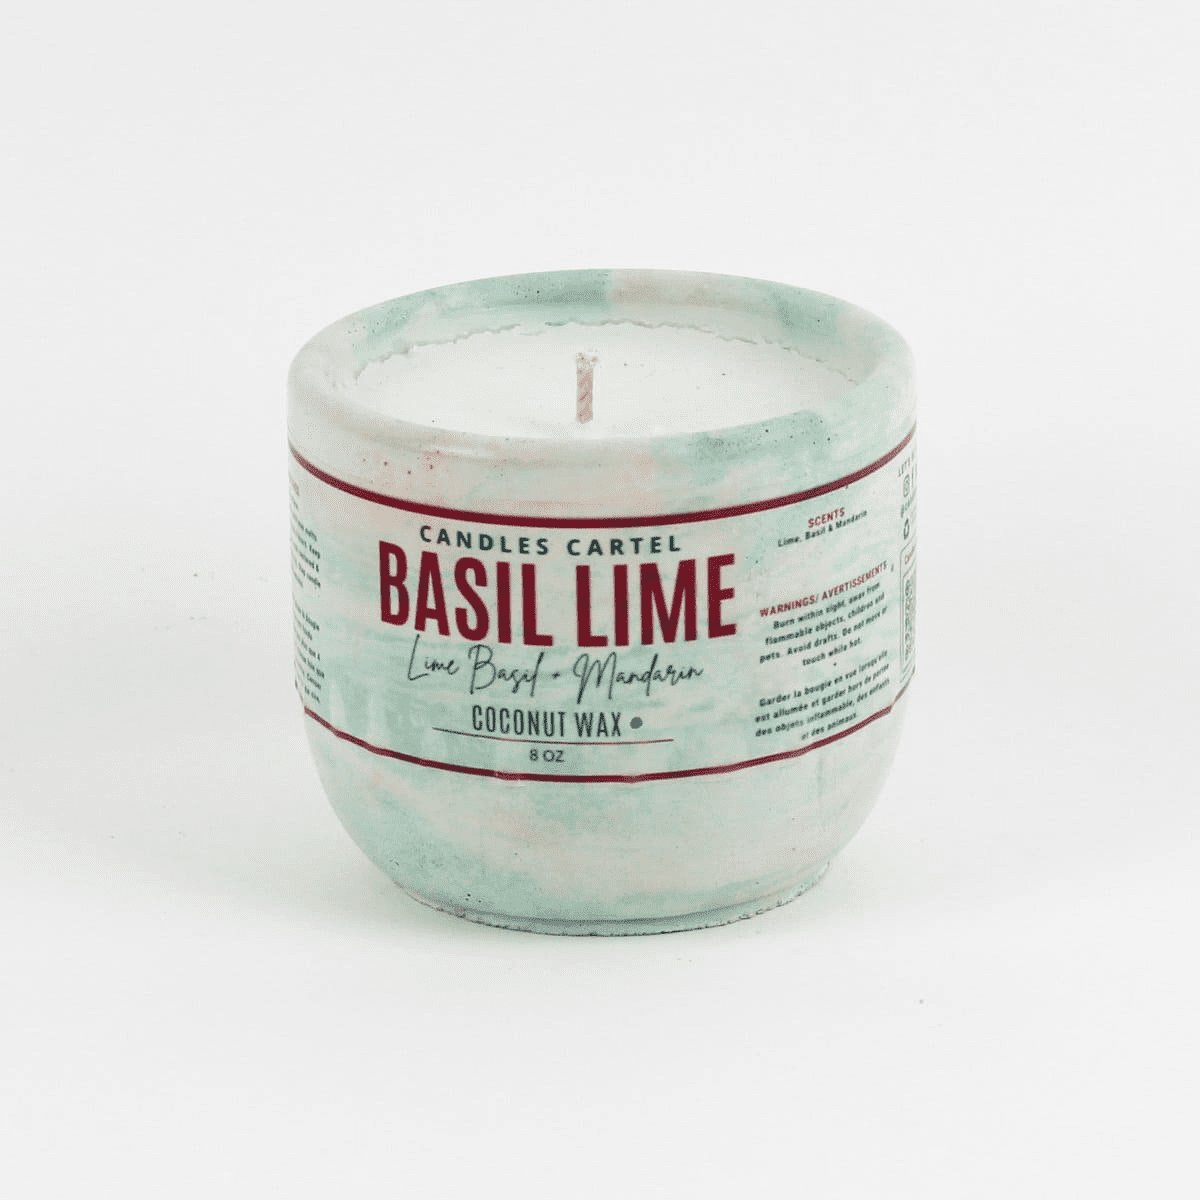 Basil and Lime Candle For Fresher Thinking